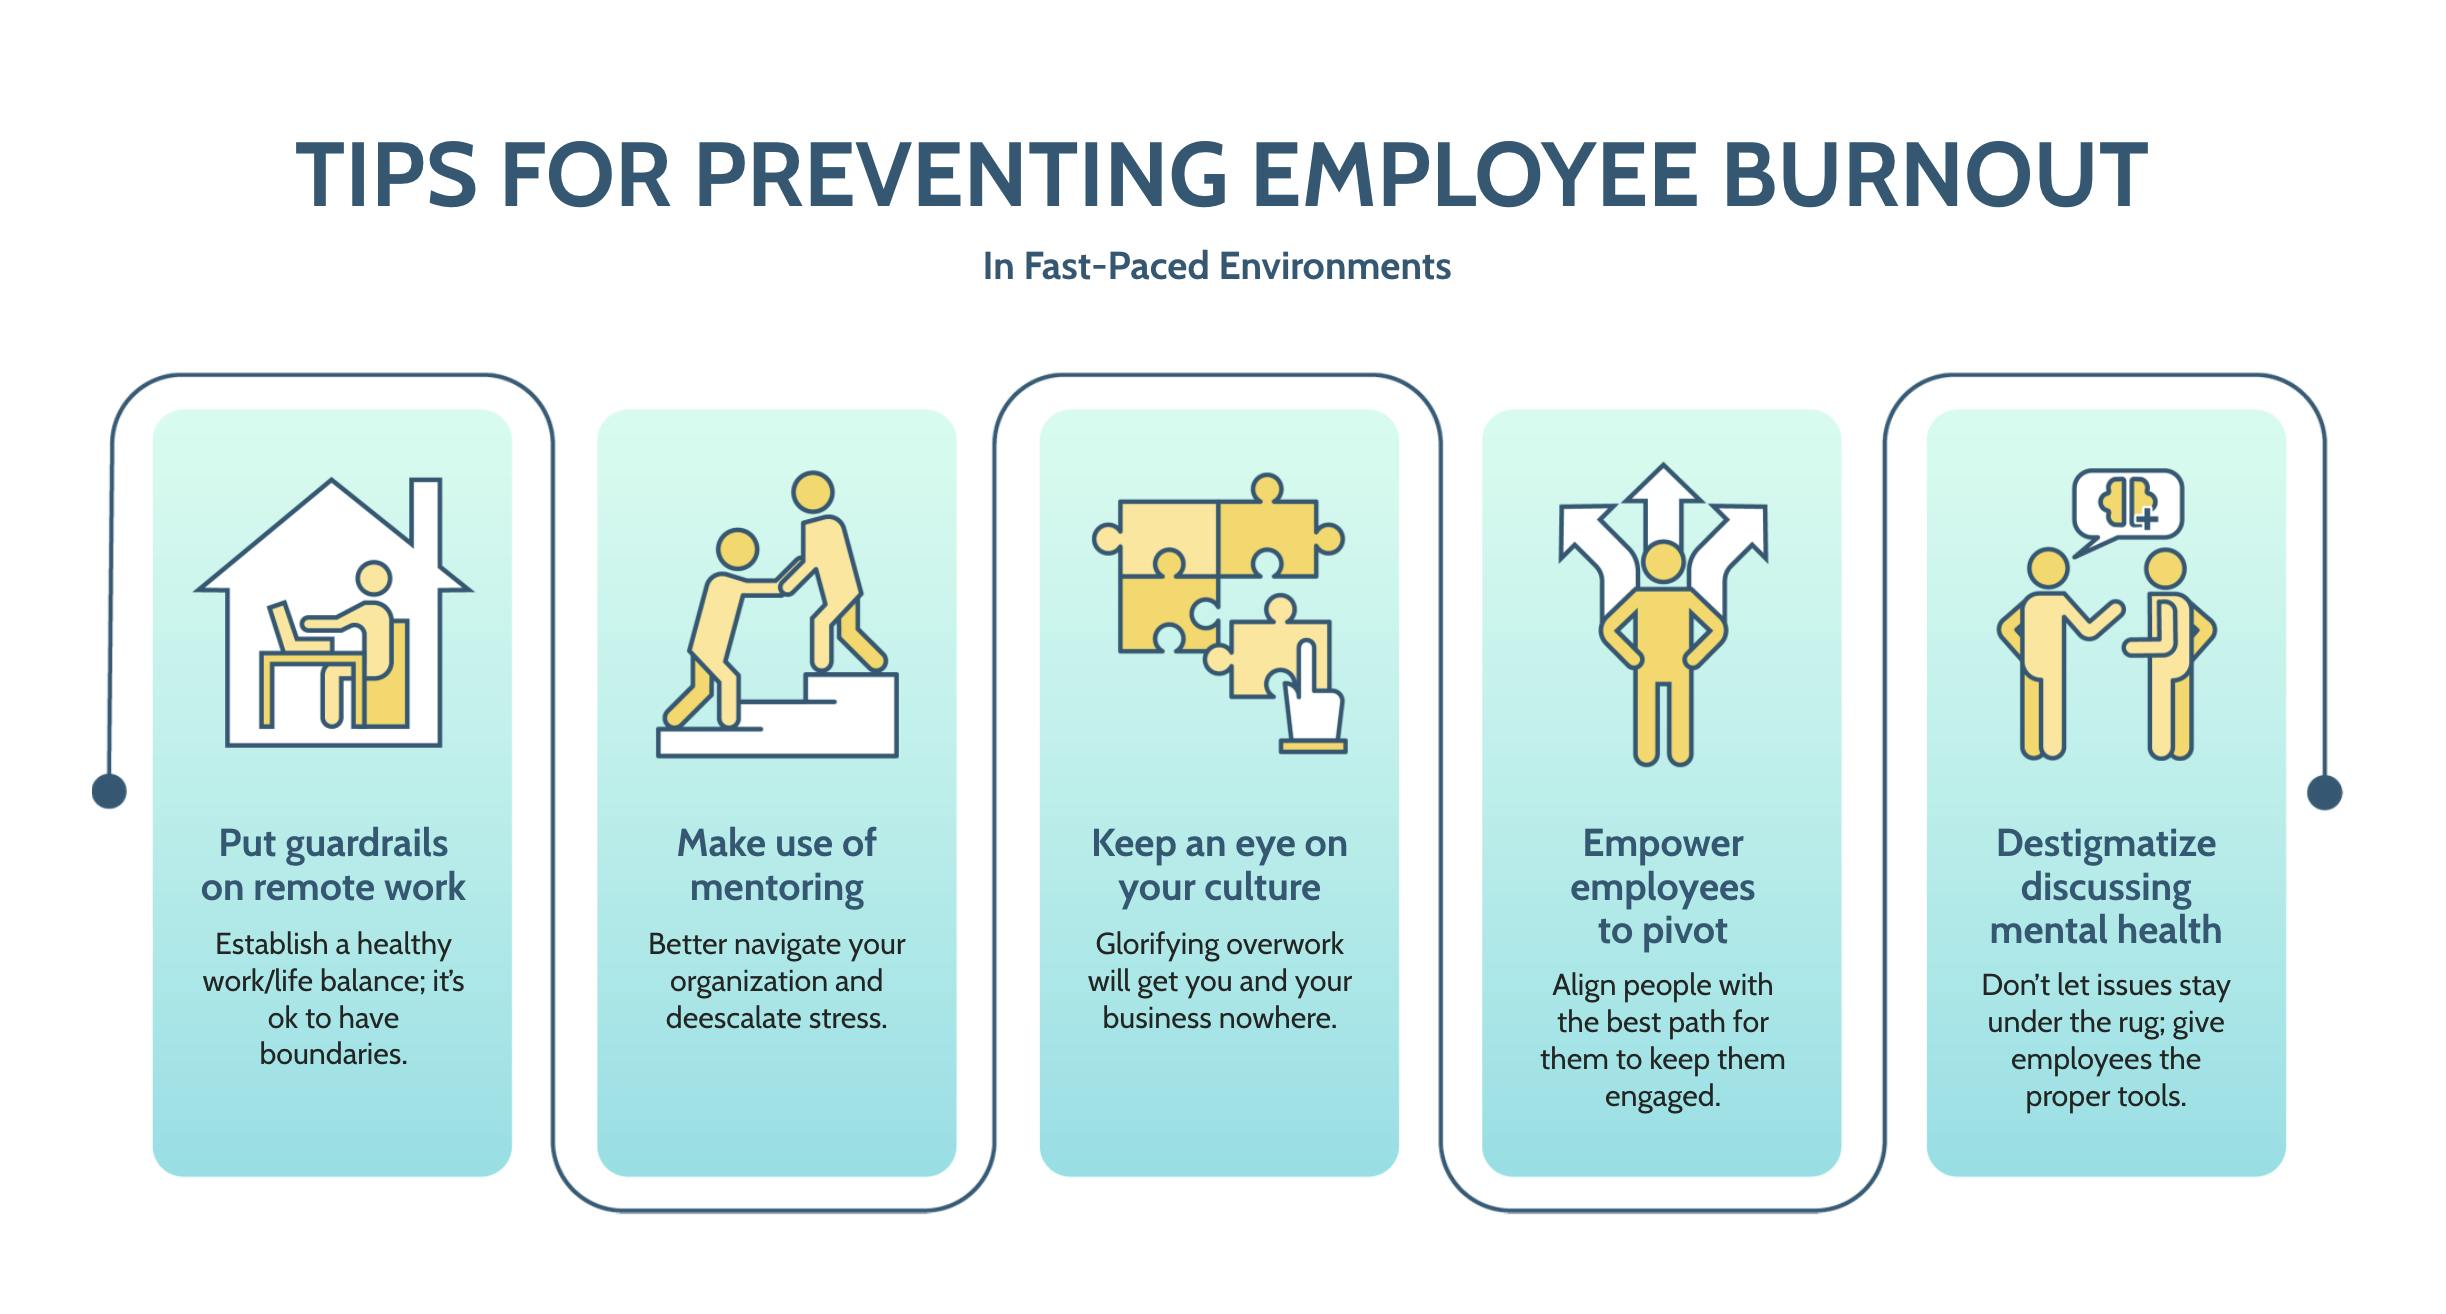 How Leading Companies Are Preventing Employee Burnout While Still Driving Growth